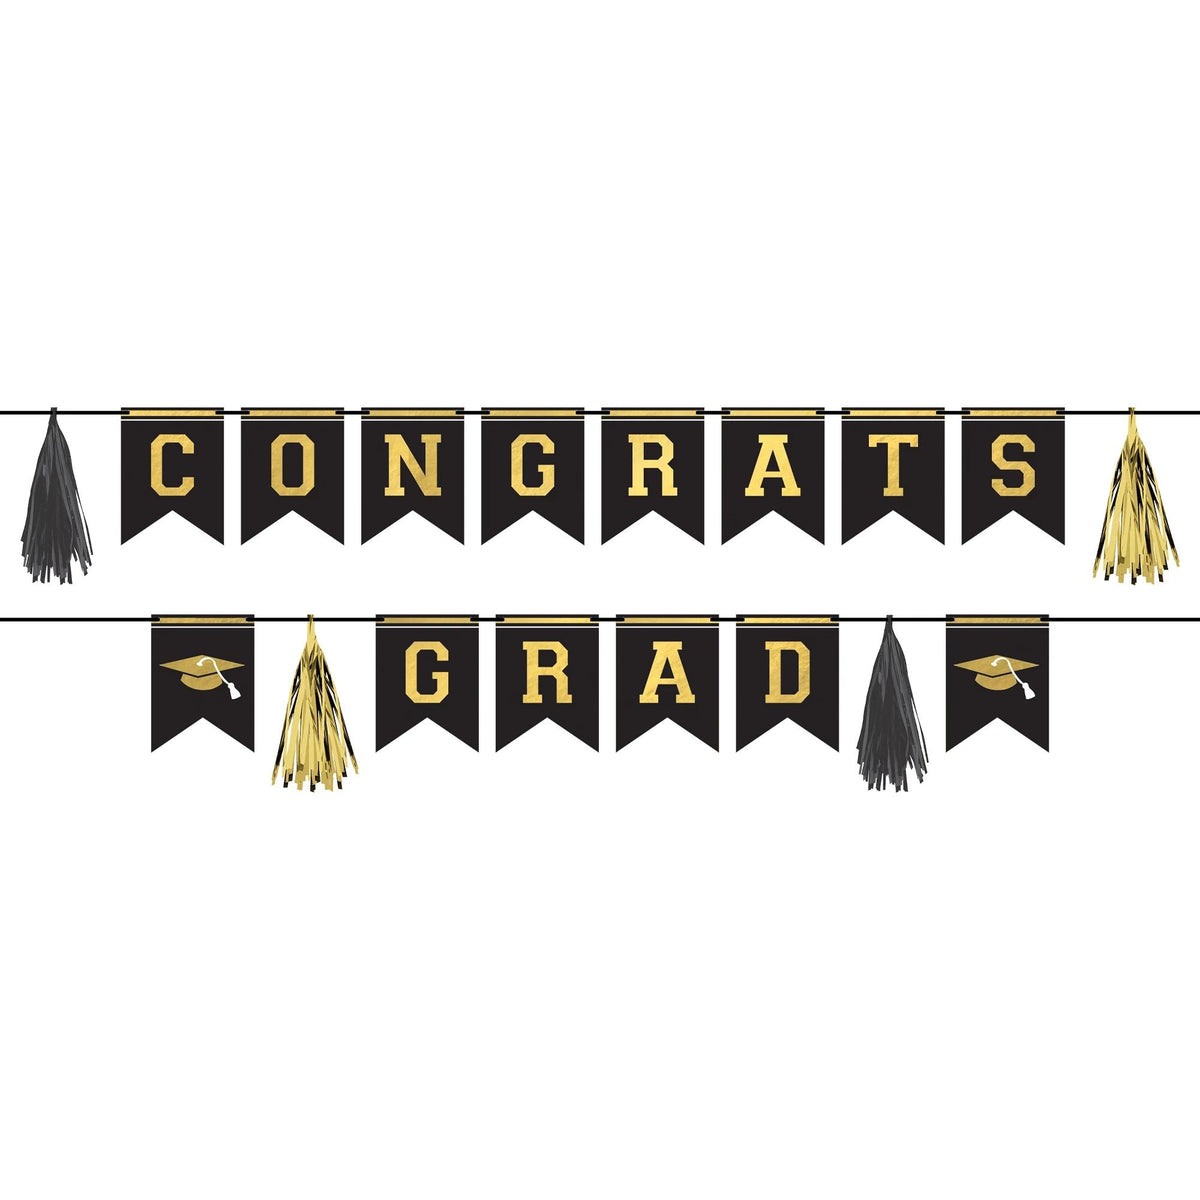 AMSCAN CA Graduation Graduation Pennant Banner with Foil, 120 x 9 Inches, 1 Count